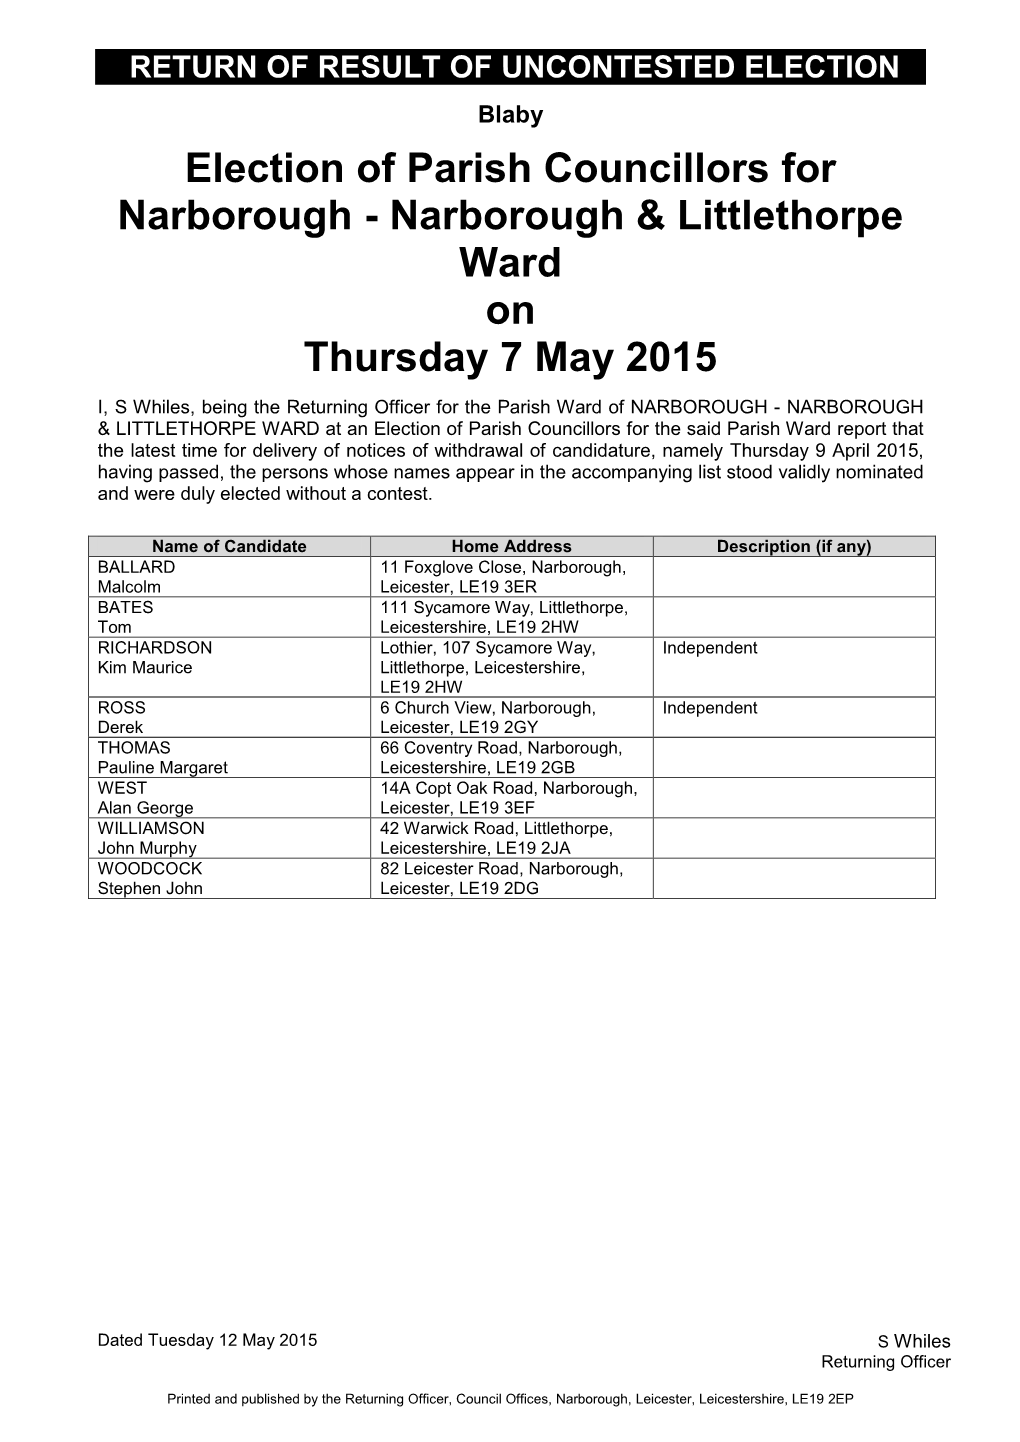 Election of Parish Councillors for Narborough - Narborough & Littlethorpe Ward on Thursday 7 May 2015